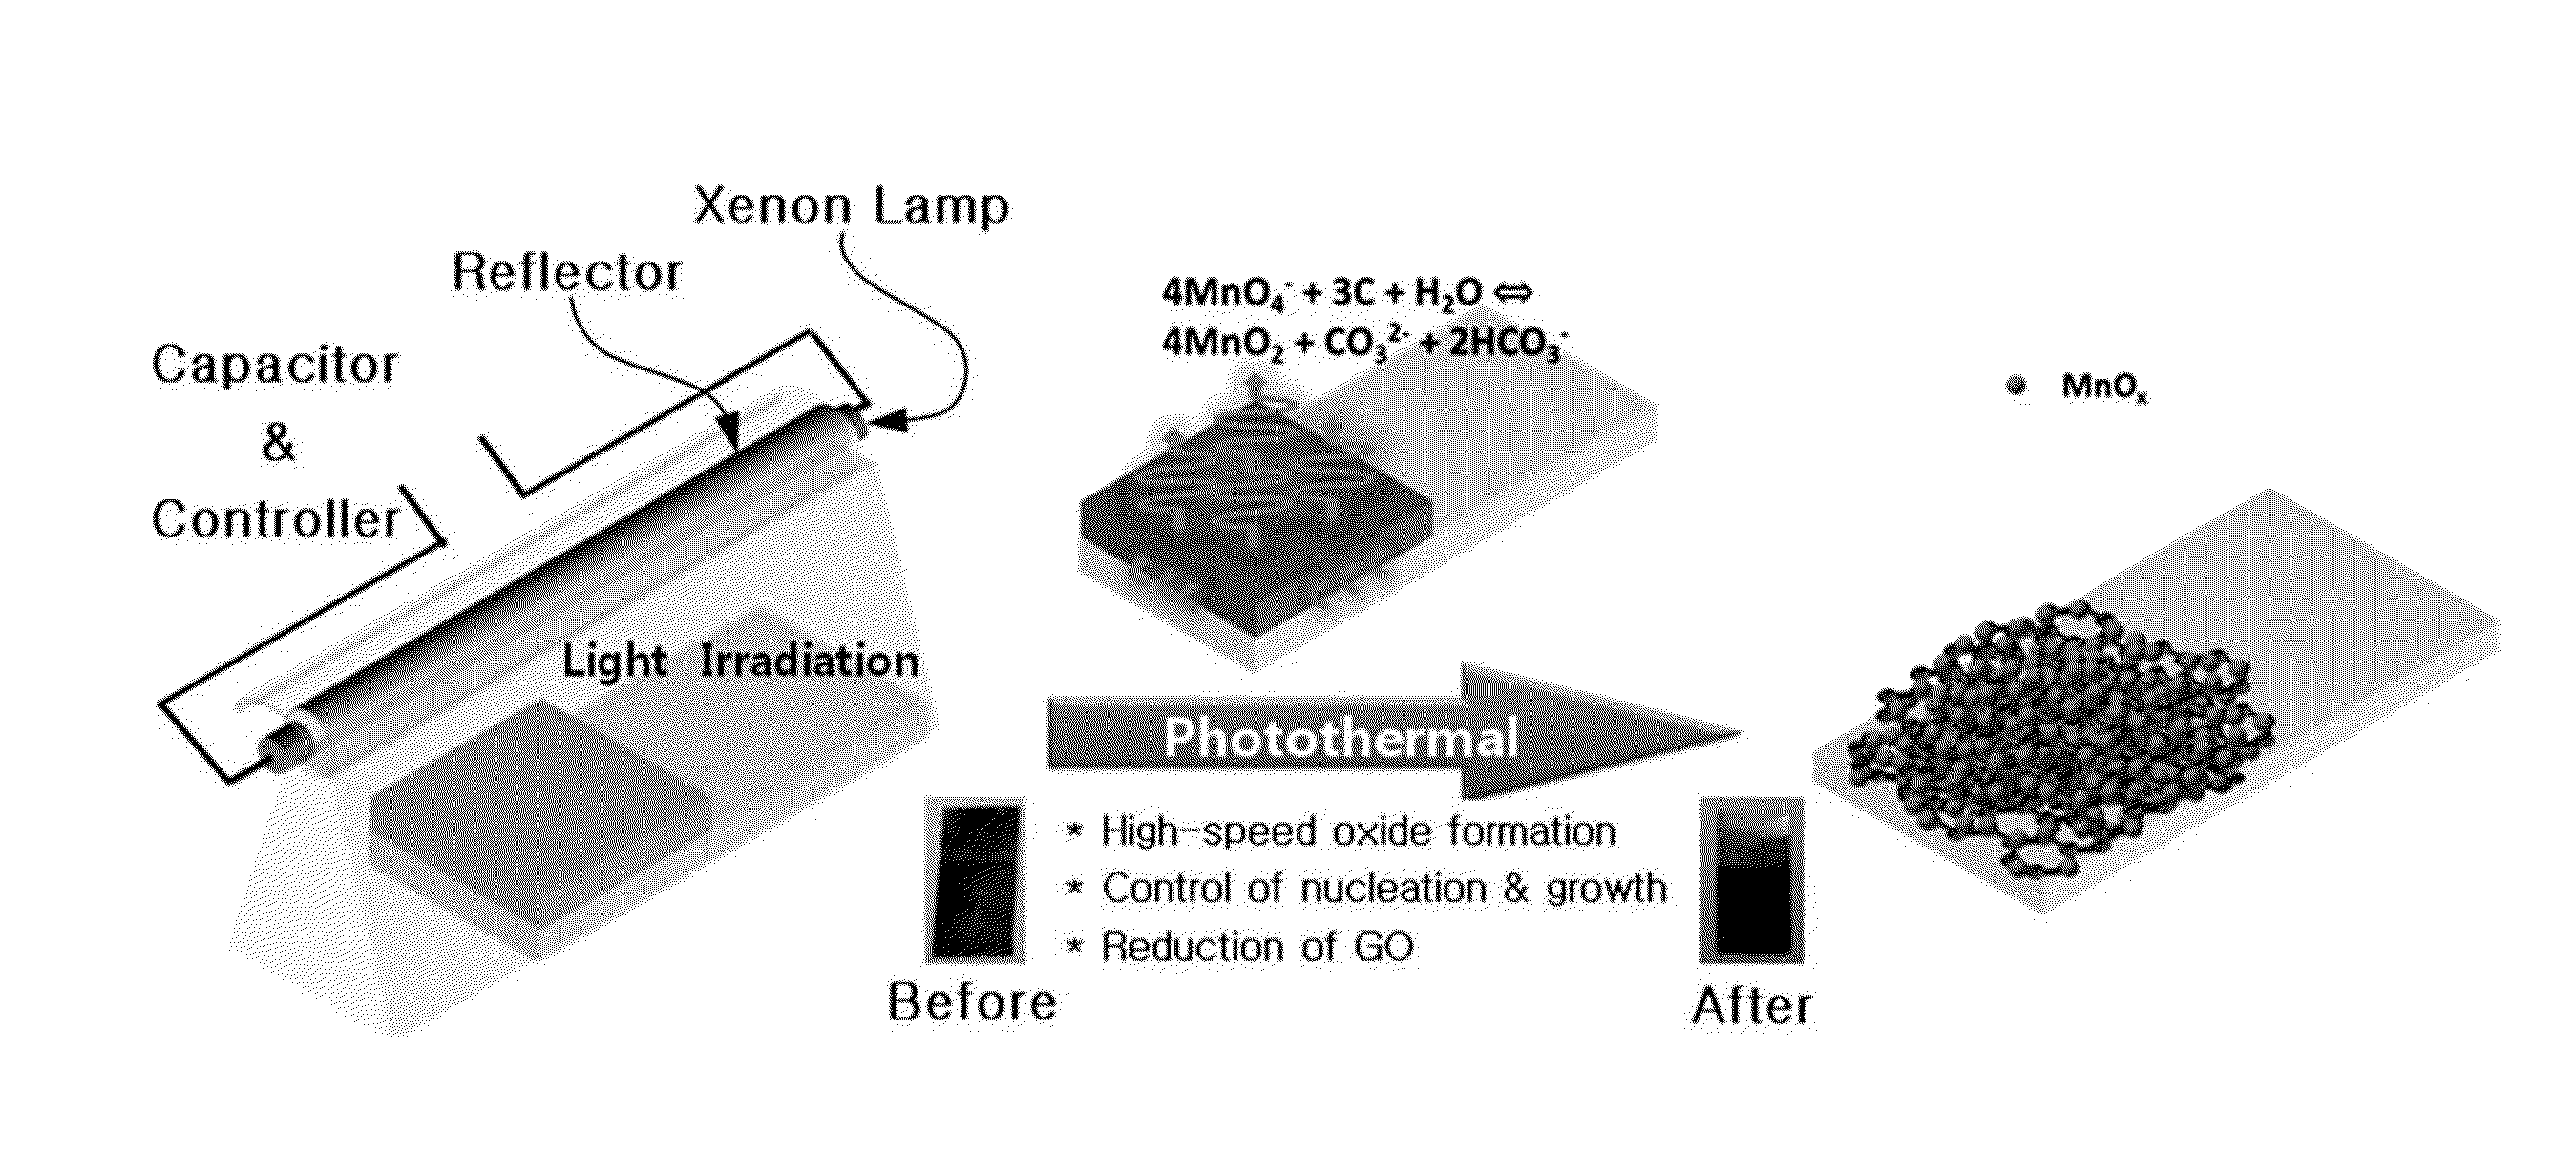 Method for manufacturing electrode, electrode manufactured according to the method, supercapacitor including the electrode, and rechargable lithium battery including the electrode